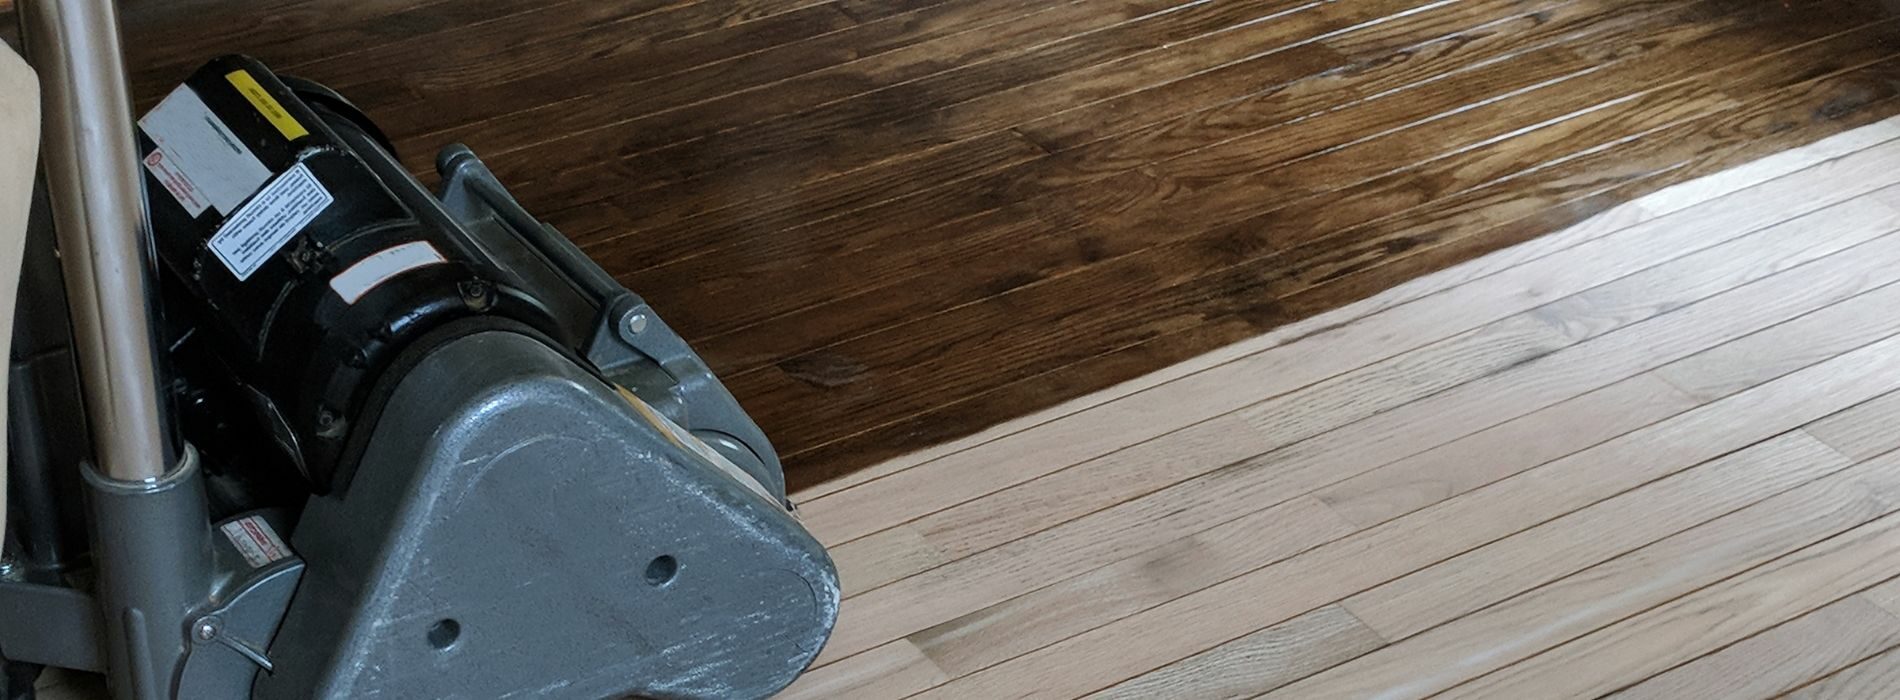 A detailed close-up of a vacuum cleaner placed on a beautifully finished wooden herringbone floor. The vacuum is part of the floor sanding process carried out by the Mr Sander®. It is connected to a dust extraction system with a HEPA filter to ensure a clean and efficient sanding result. The vacuum's nozzle is positioned near the floor surface, ready to capture and remove any dust and debris generated during the sanding process. The wood's rich color and the intricate herringbone pattern are visible, adding to the overall aesthetic appeal of the image